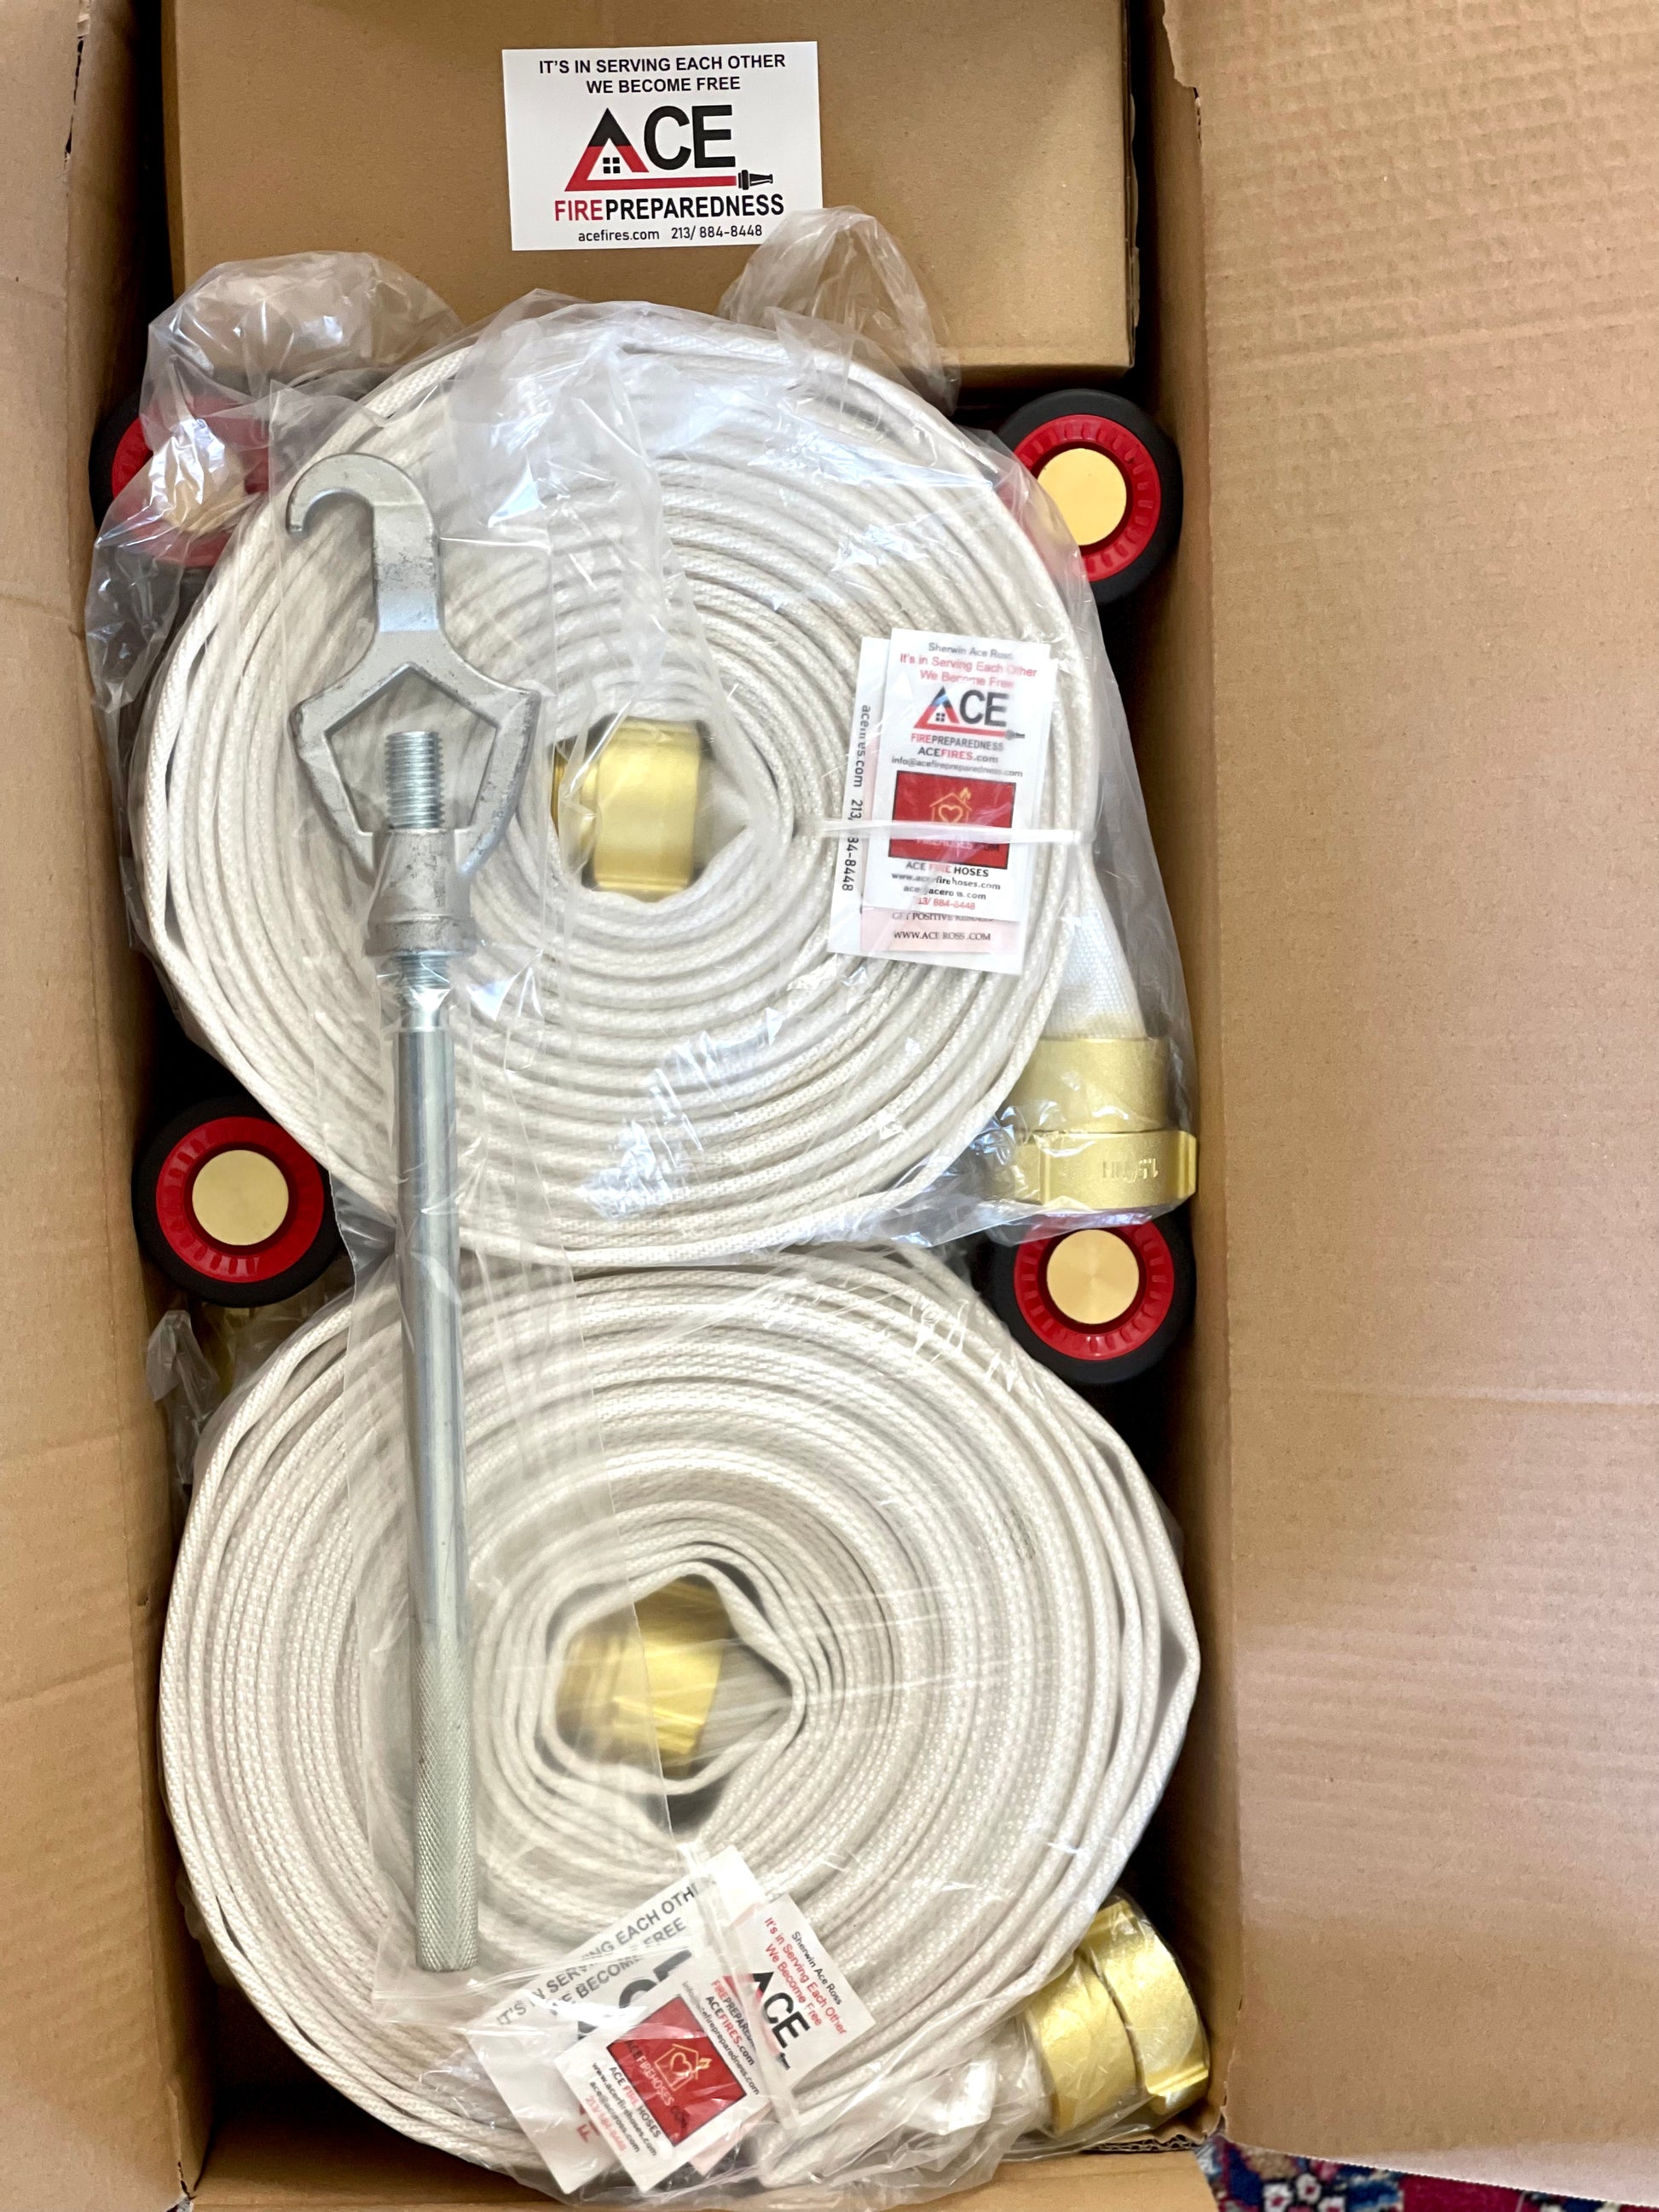 Fire-Safe Home Bundle Package 4 75' x 1.5 Hoses, 4 Nozzles, Valve, Wrench FM Approved